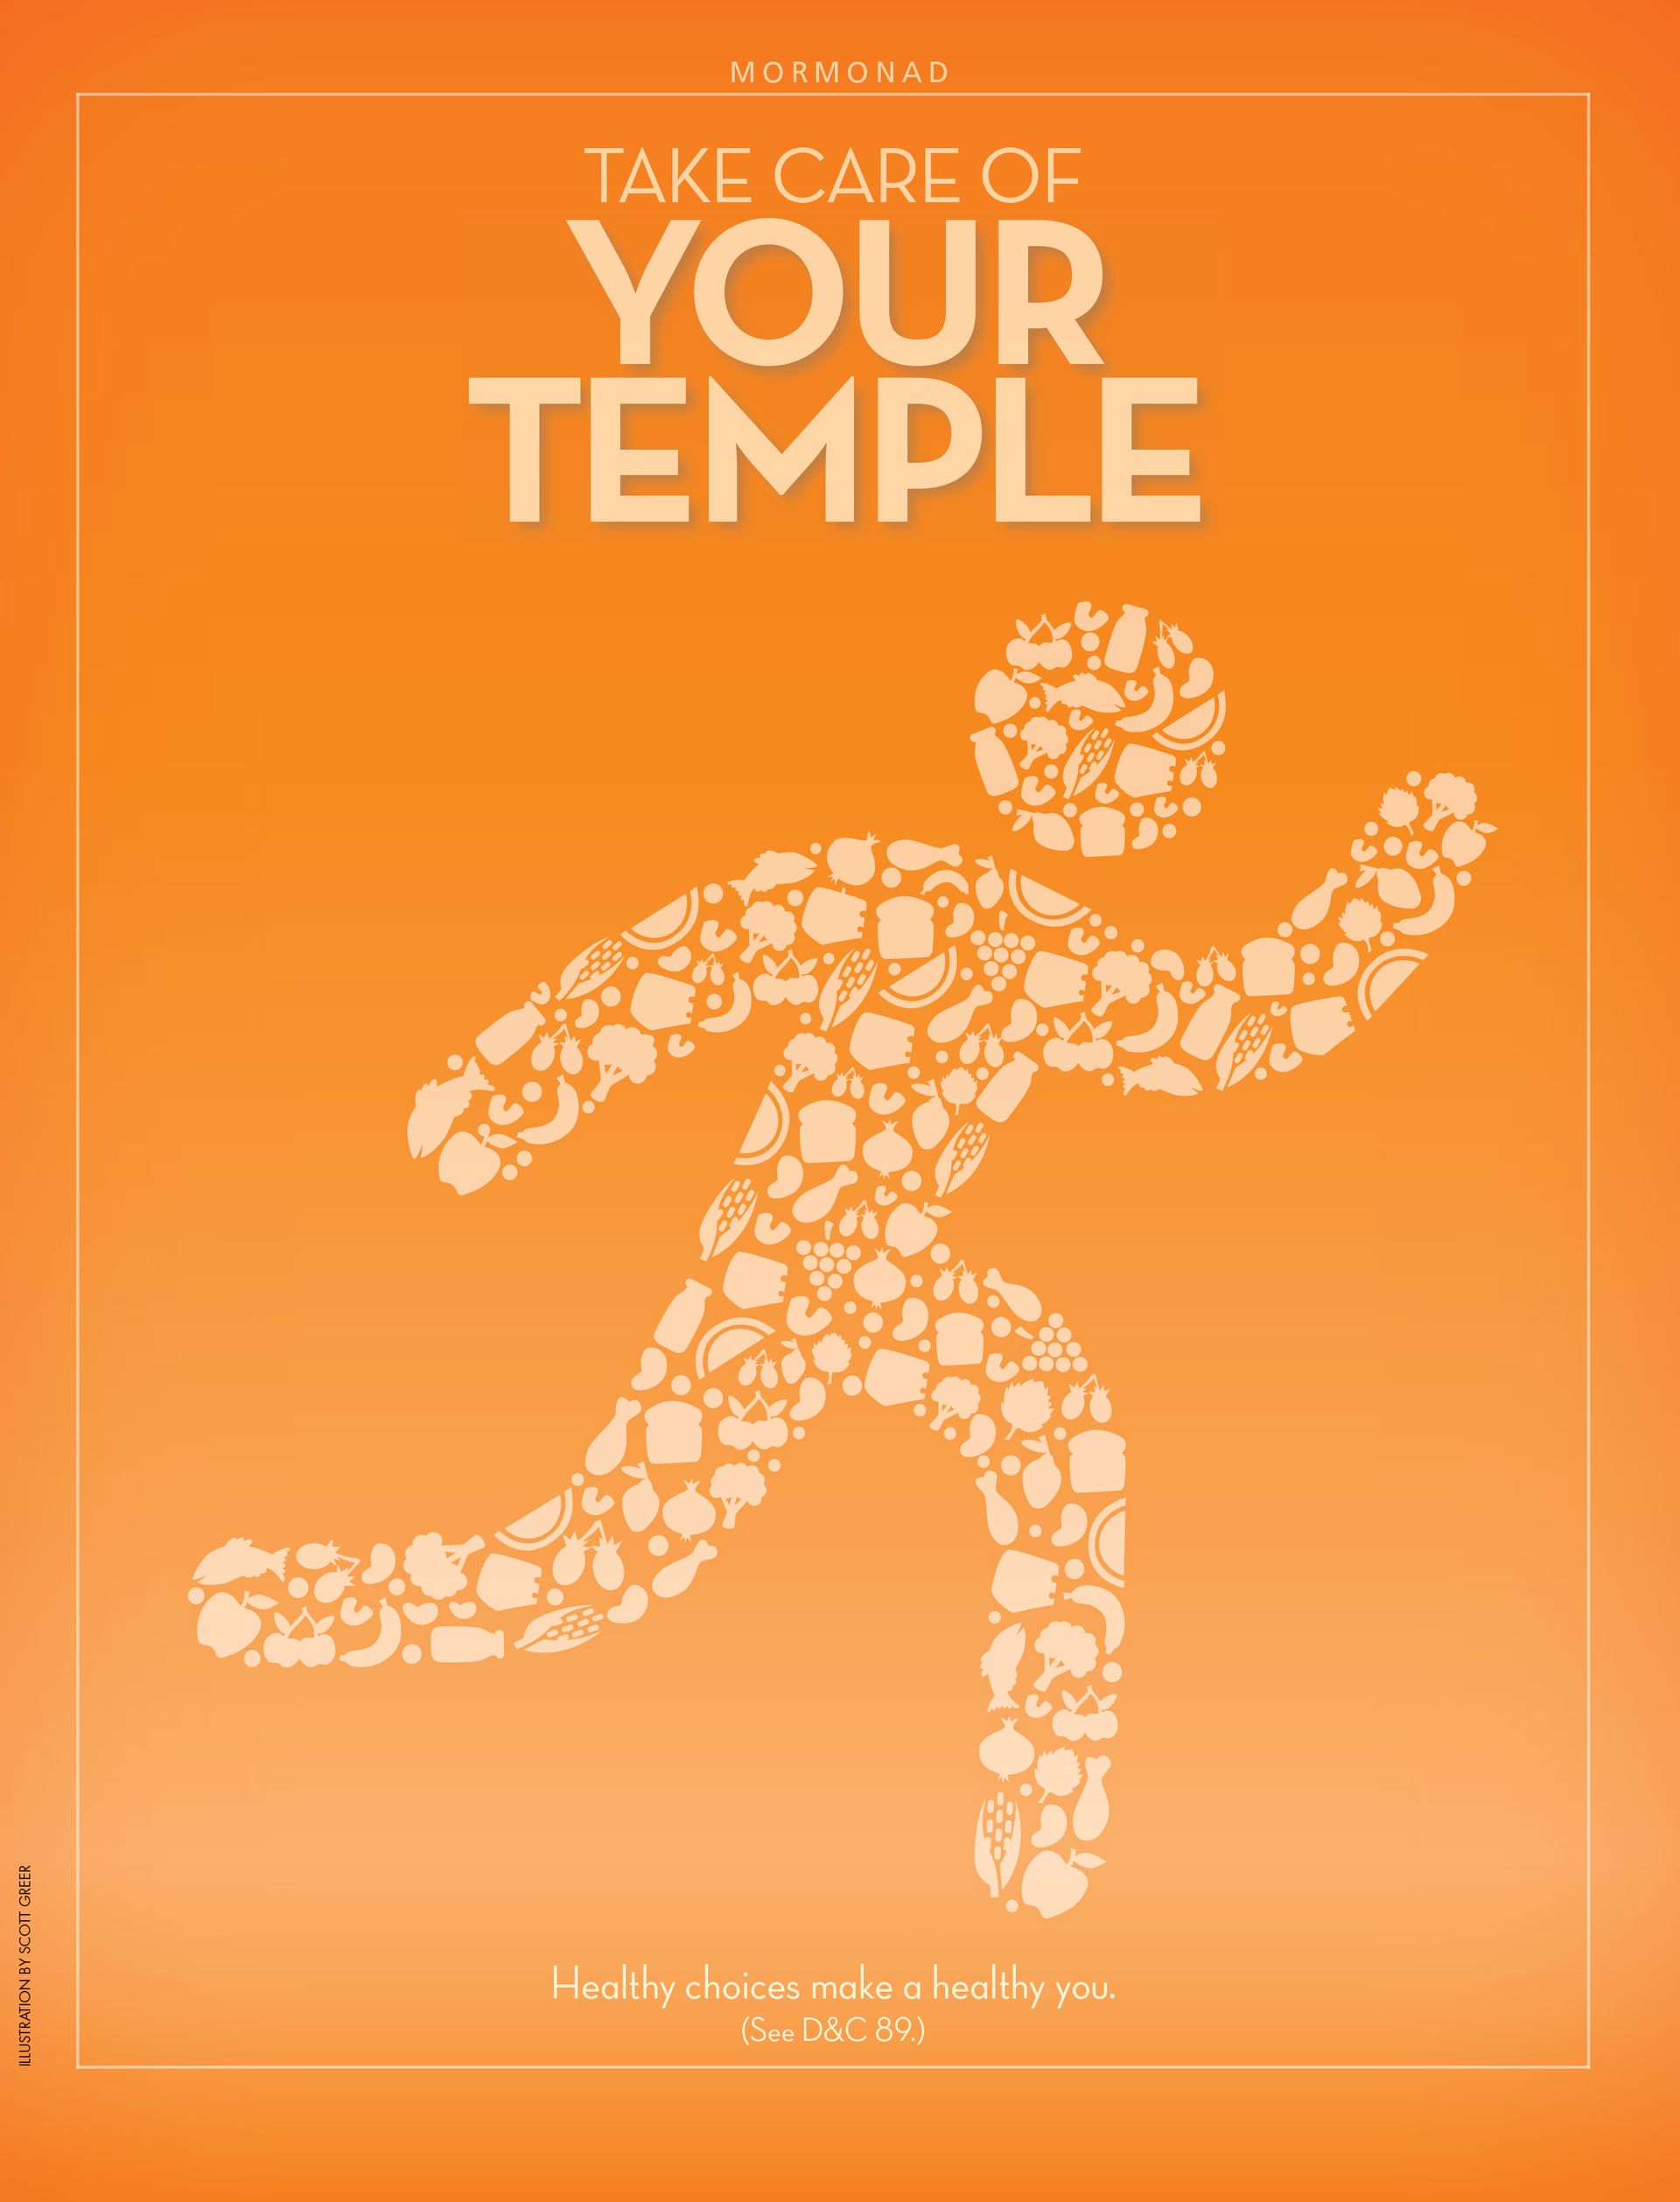 Take Care of Your Temple. Healthy choices make a healthy you. (See D&C 89.) Mar. 2012 © undefined ipCode 1.